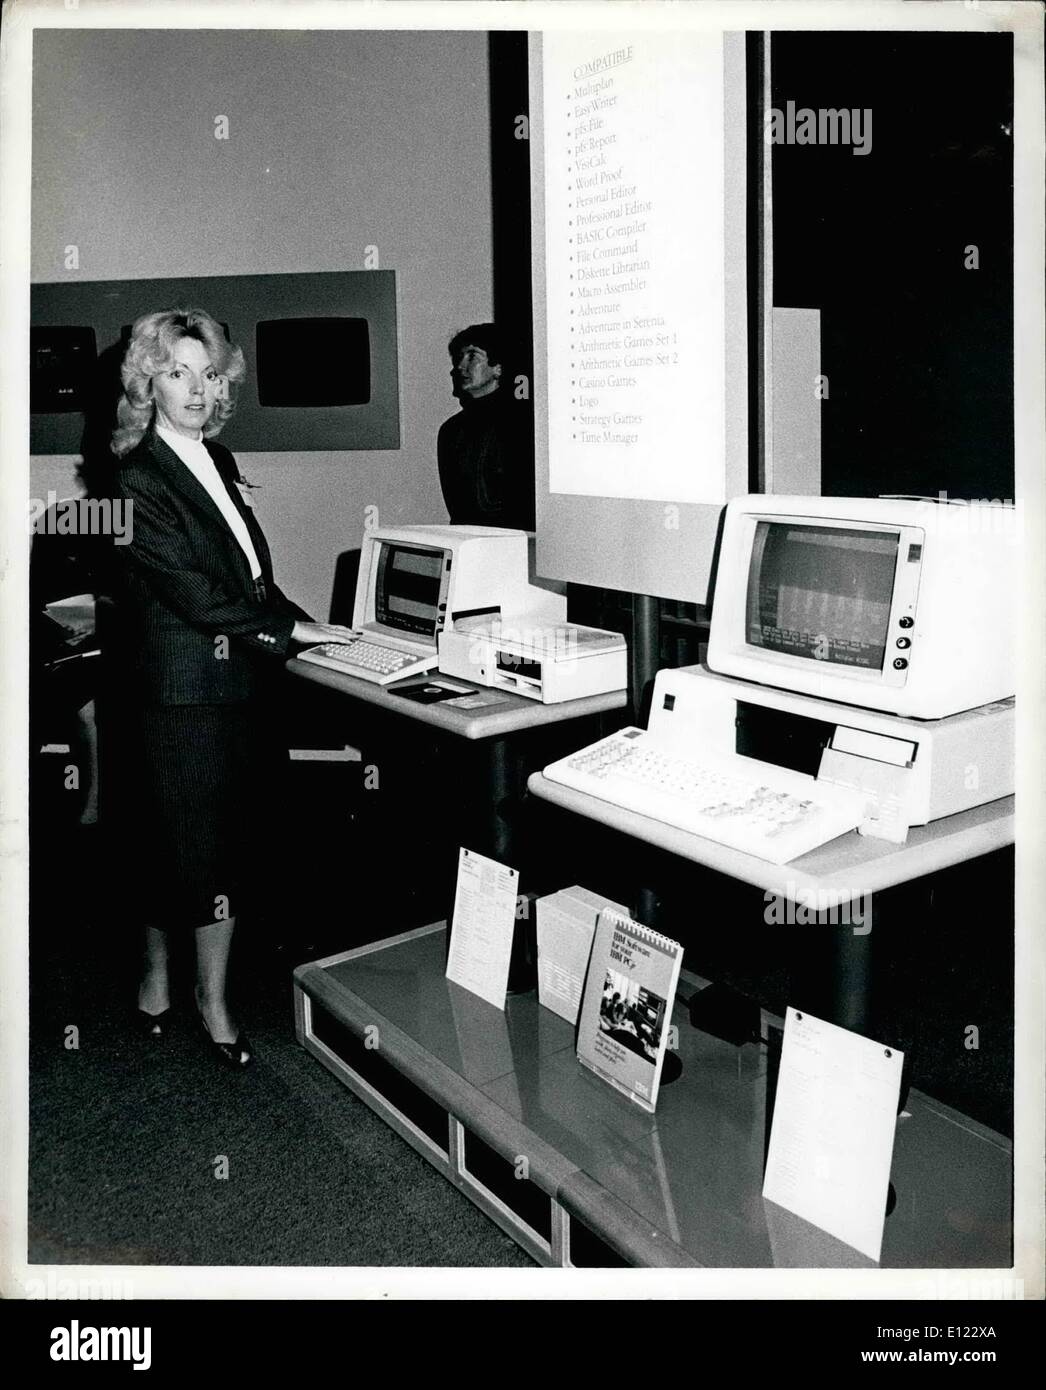 Nov. 11, 1983 - IBM Introduces the new PC Jr. in New York Photo Shows Left the new PC Jr. nicknamed the Peanut compared with the popular IBM PC Right Foreground. Stock Photo